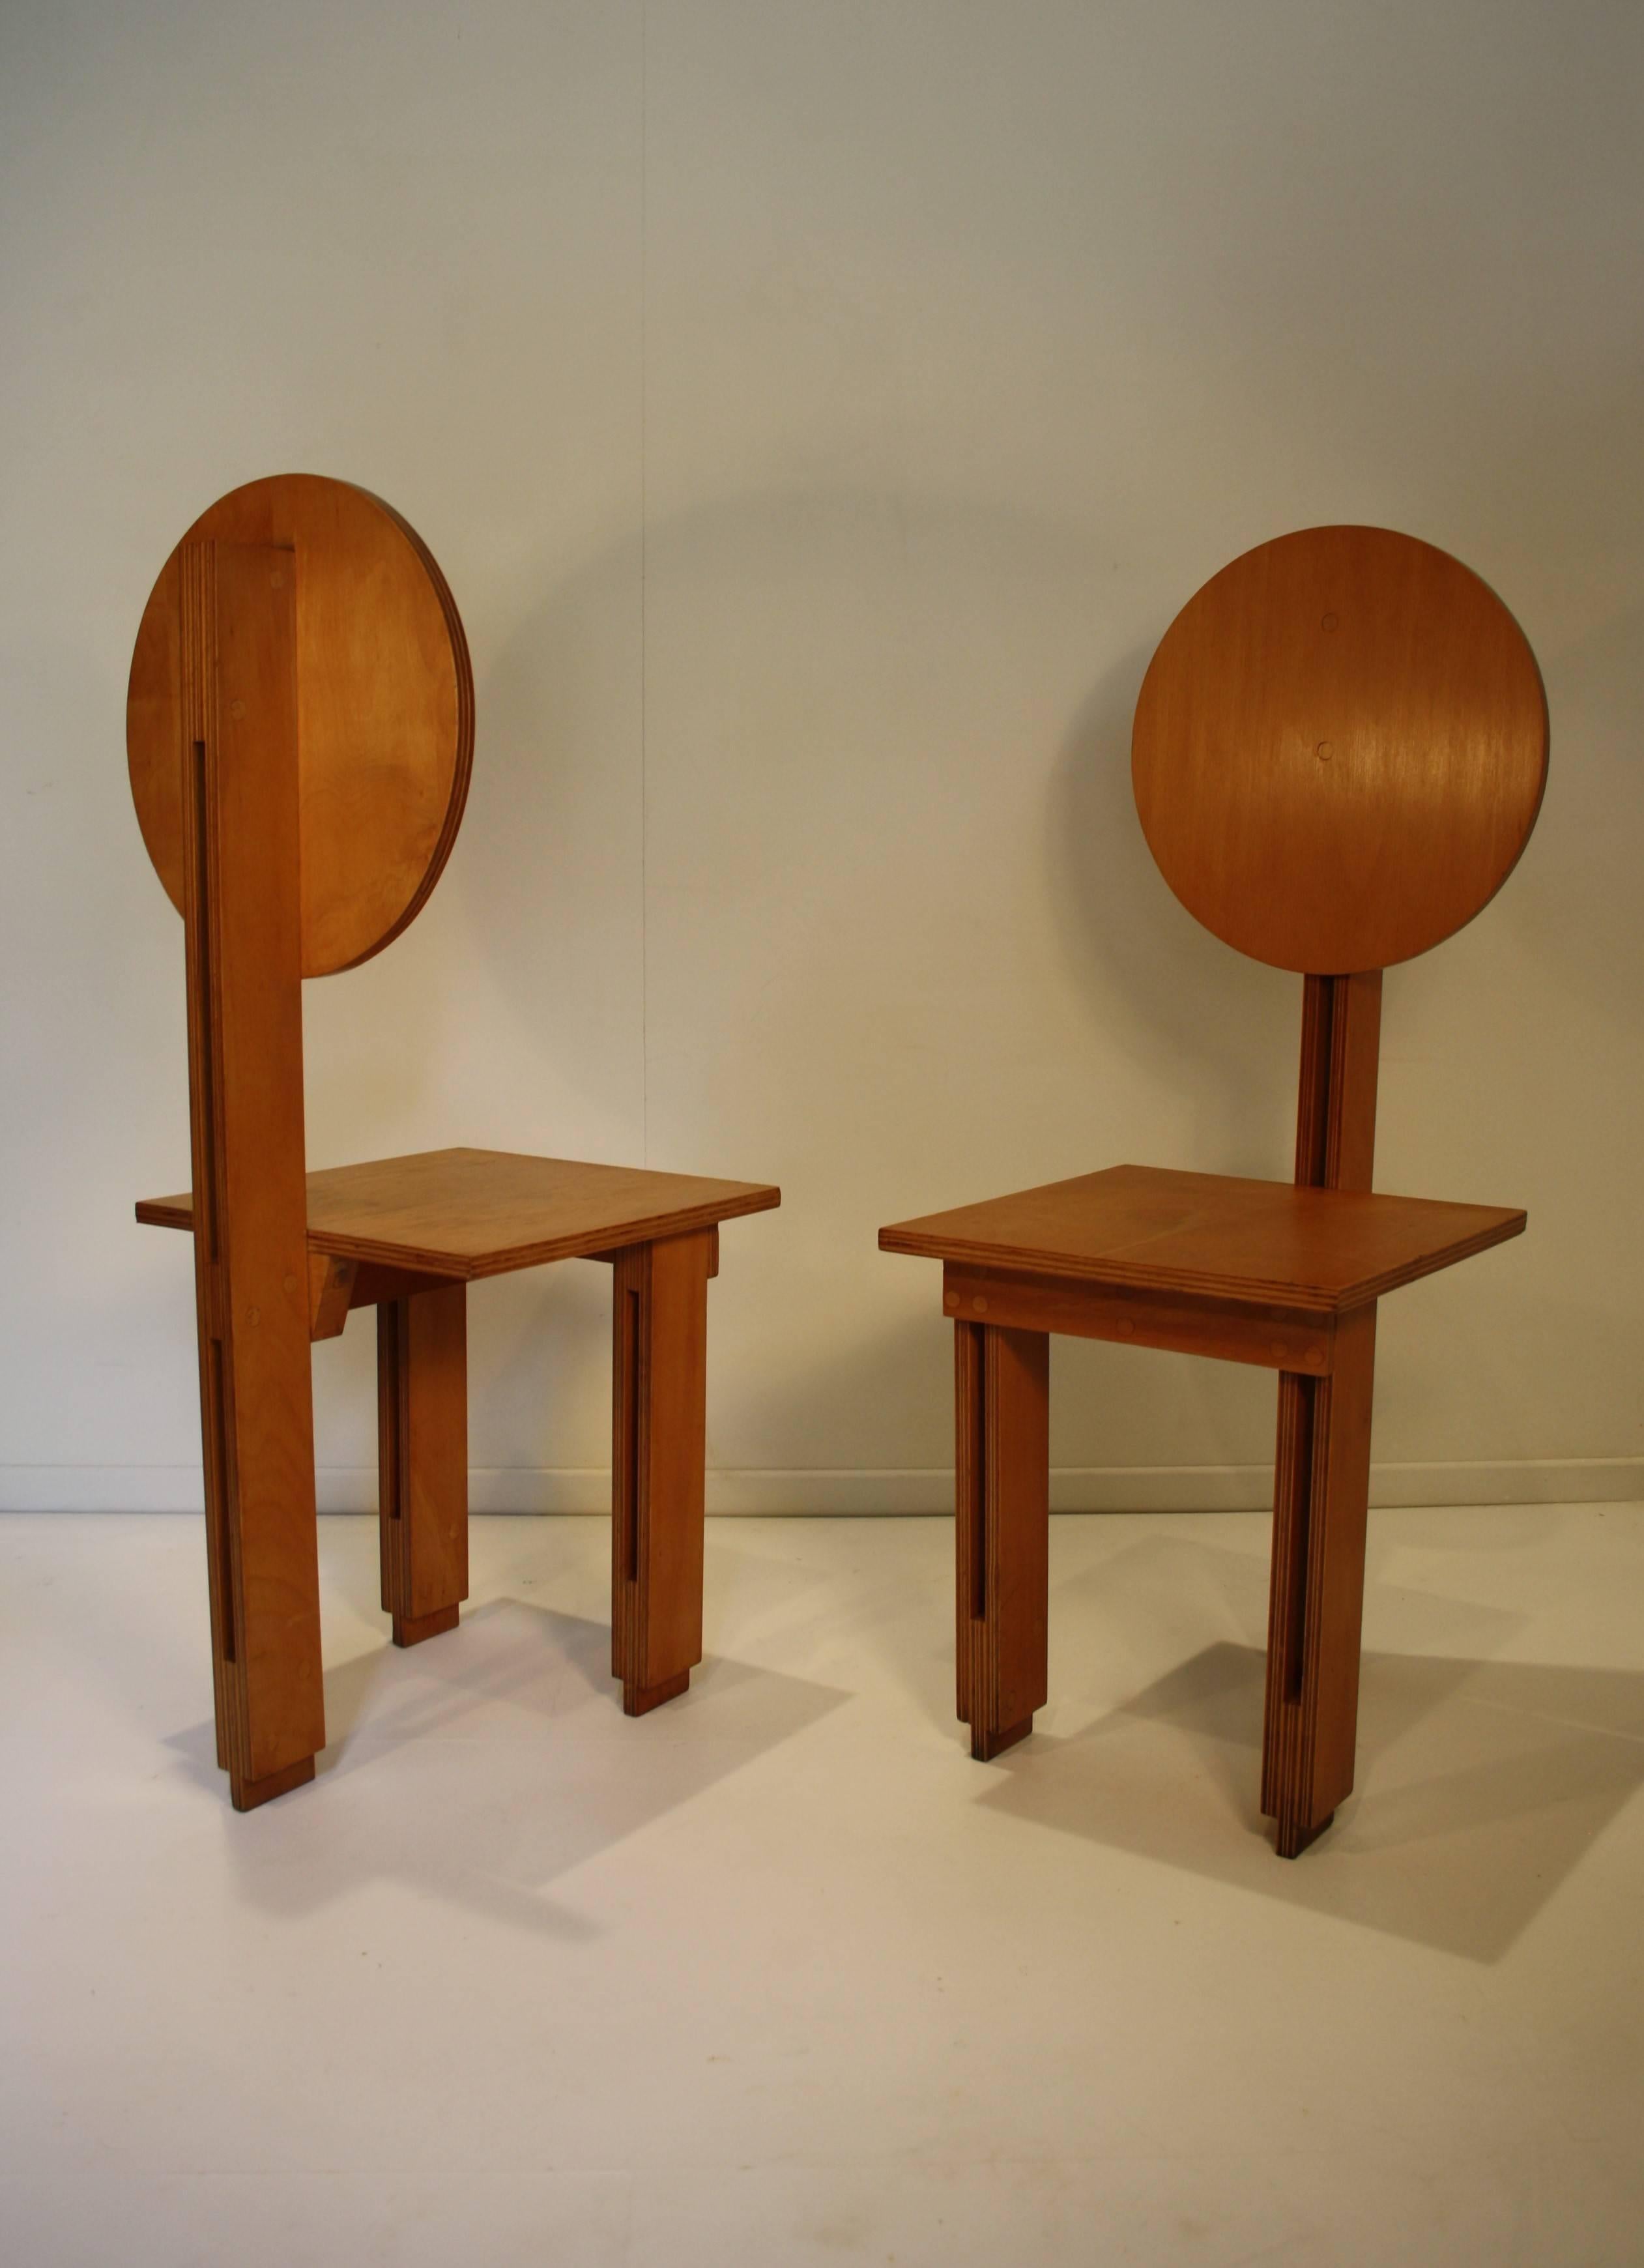 A pair of chairs by Marcel-Louis Baugniet made from plywood in original condition.
Very simple cubist chairs with fine details of the wood connections.
Marcel-Louis Baugniet, (1896-1995) is a Belgian avant-garde artist considered as one of the